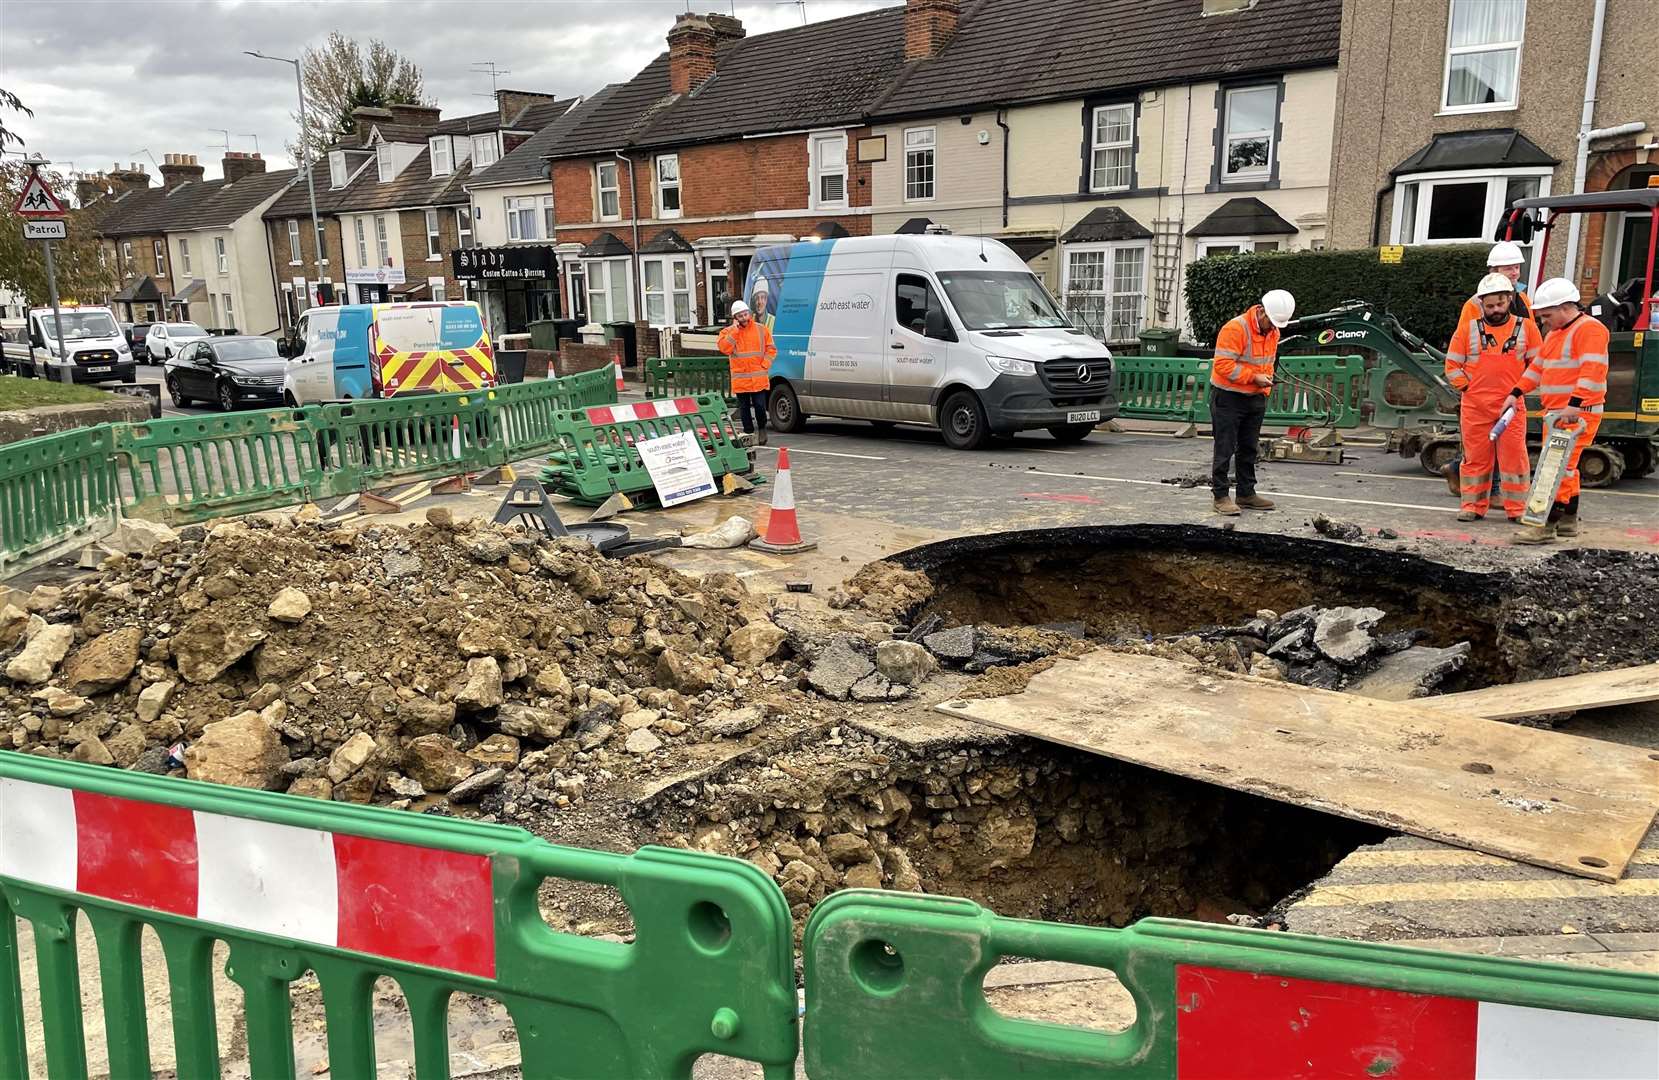 The sinkhole is near Cherry Orchard Way in Barming